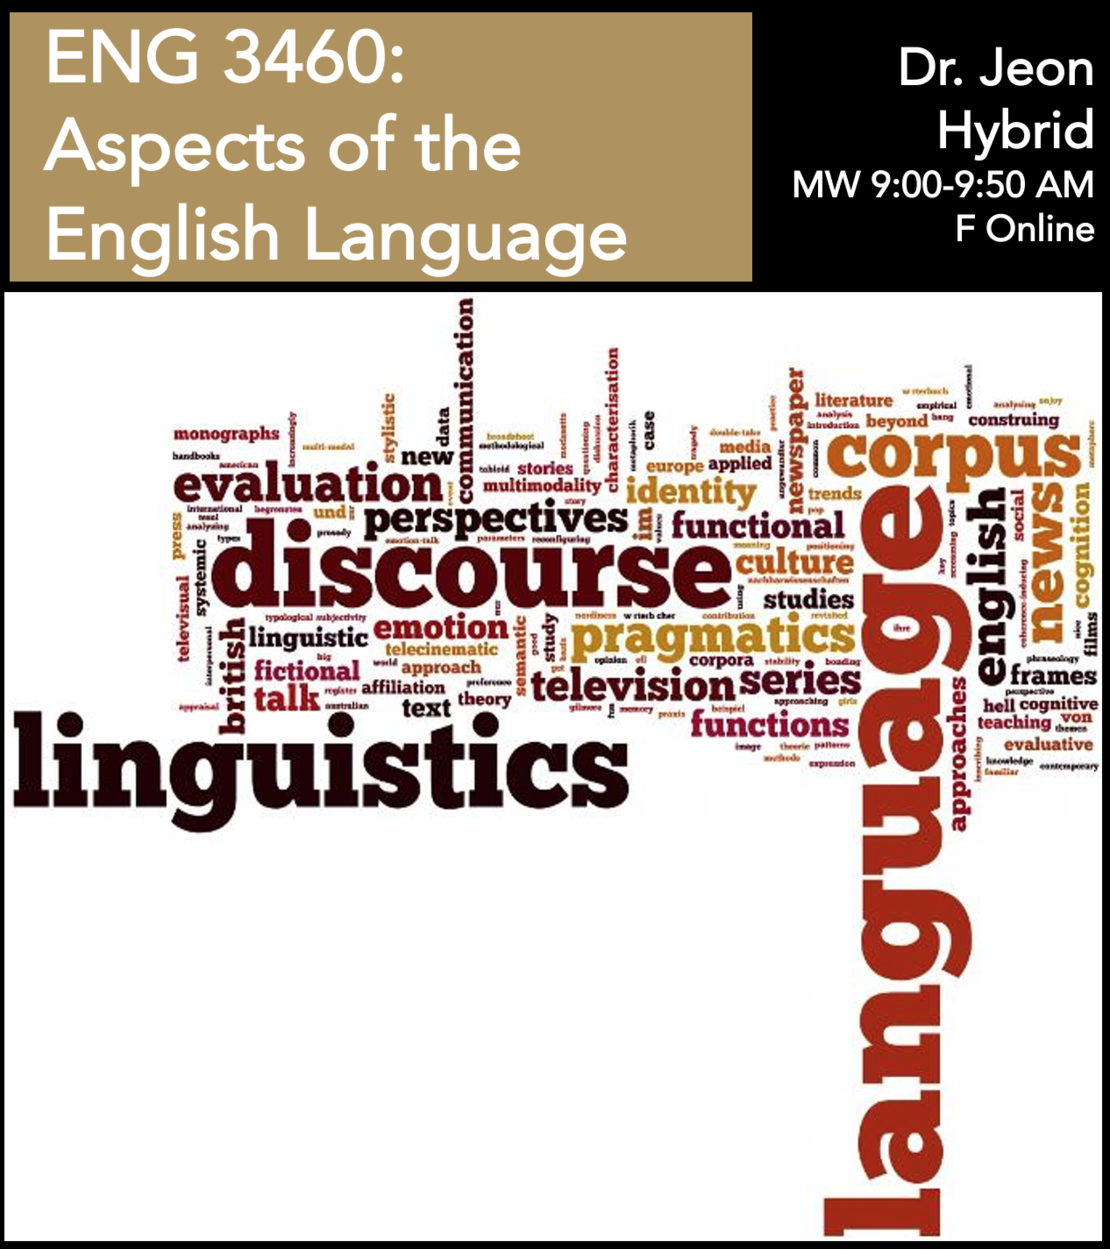 ENG 3460: Aspects of the English Language Dr. Jeon MW 9:00-9:05 AM F Online